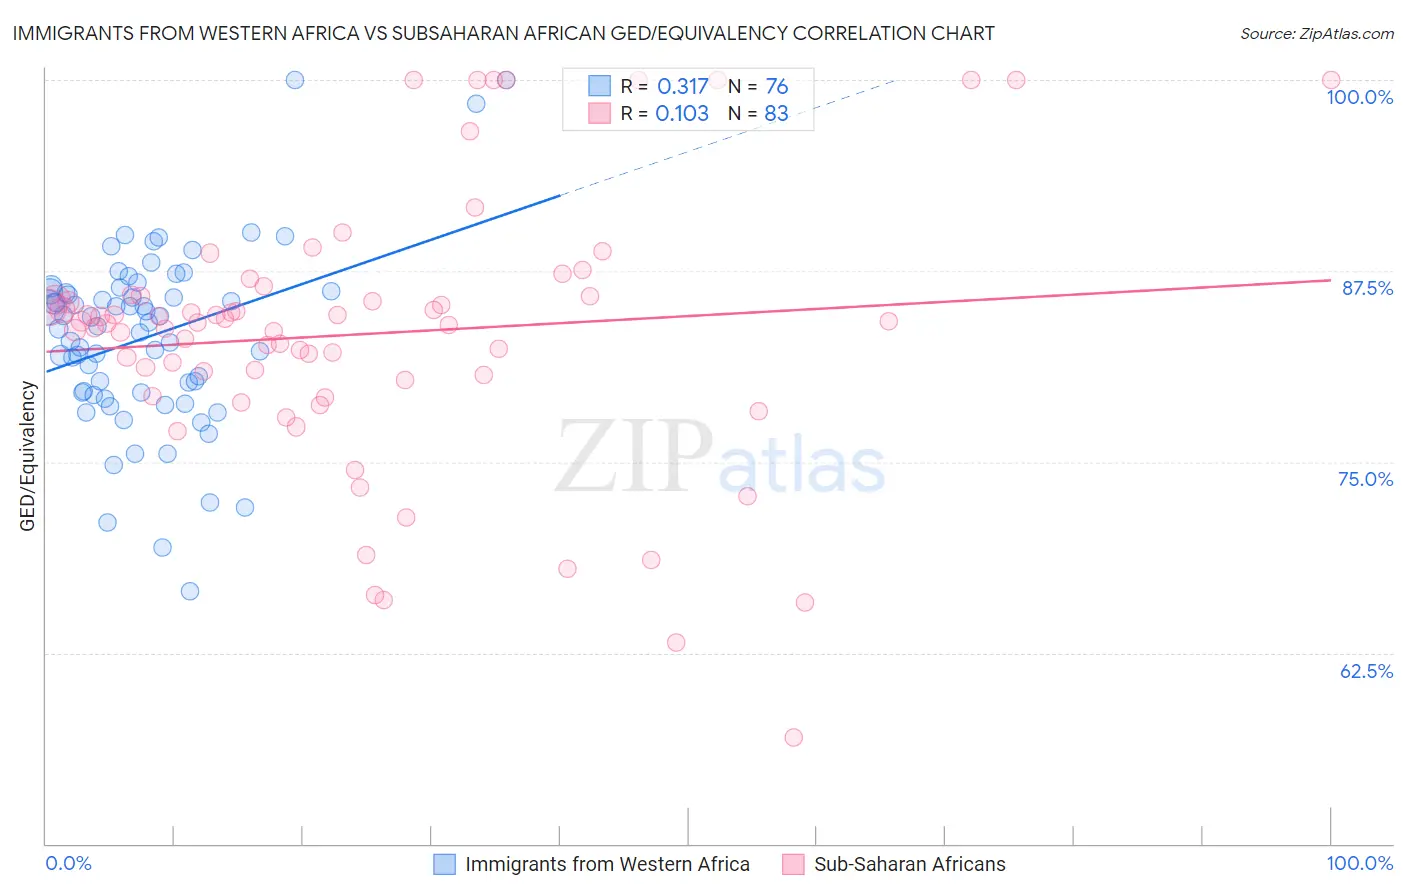 Immigrants from Western Africa vs Subsaharan African GED/Equivalency